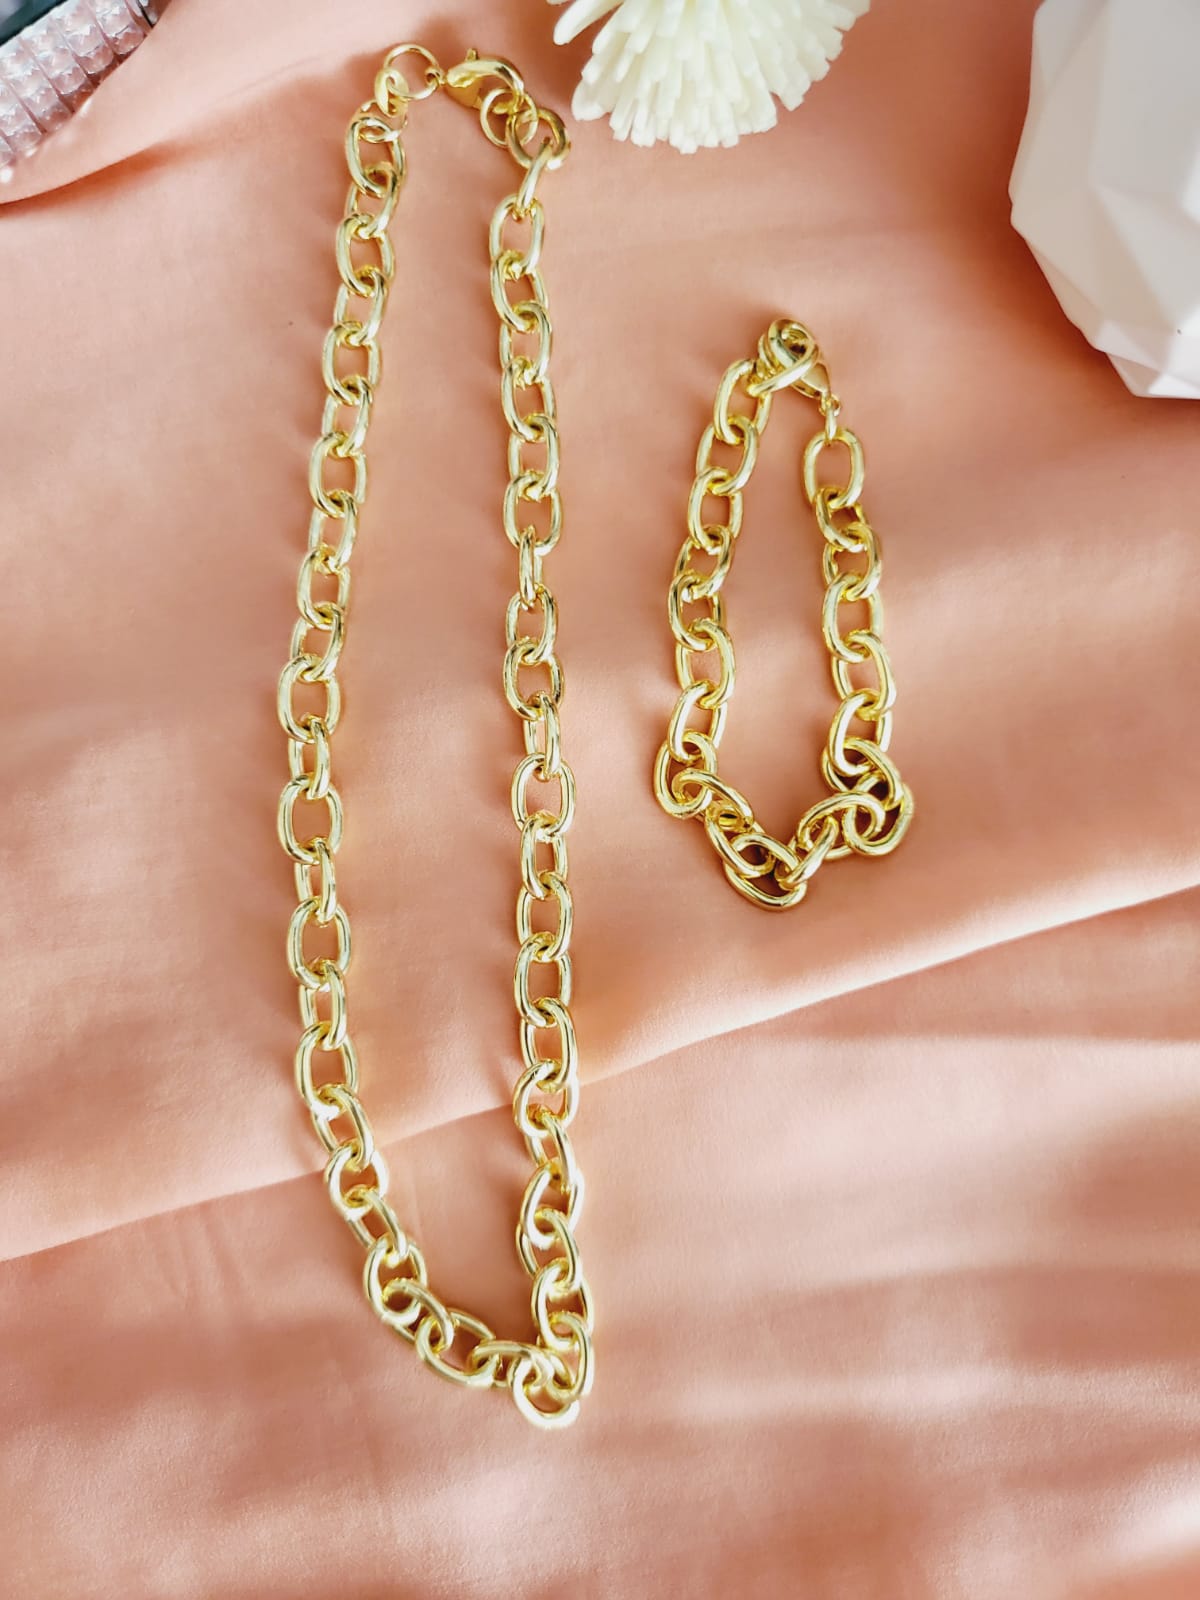 Gold Filled Necklaces, Vintage Necklace, Minimalist Jewelry, Hello Luxy, Fine Jewelry, Tik Tok Jewelry, Tik Tok Fashion, Best Gift for wife, Wife best gift, rope Chain, Chunky chain